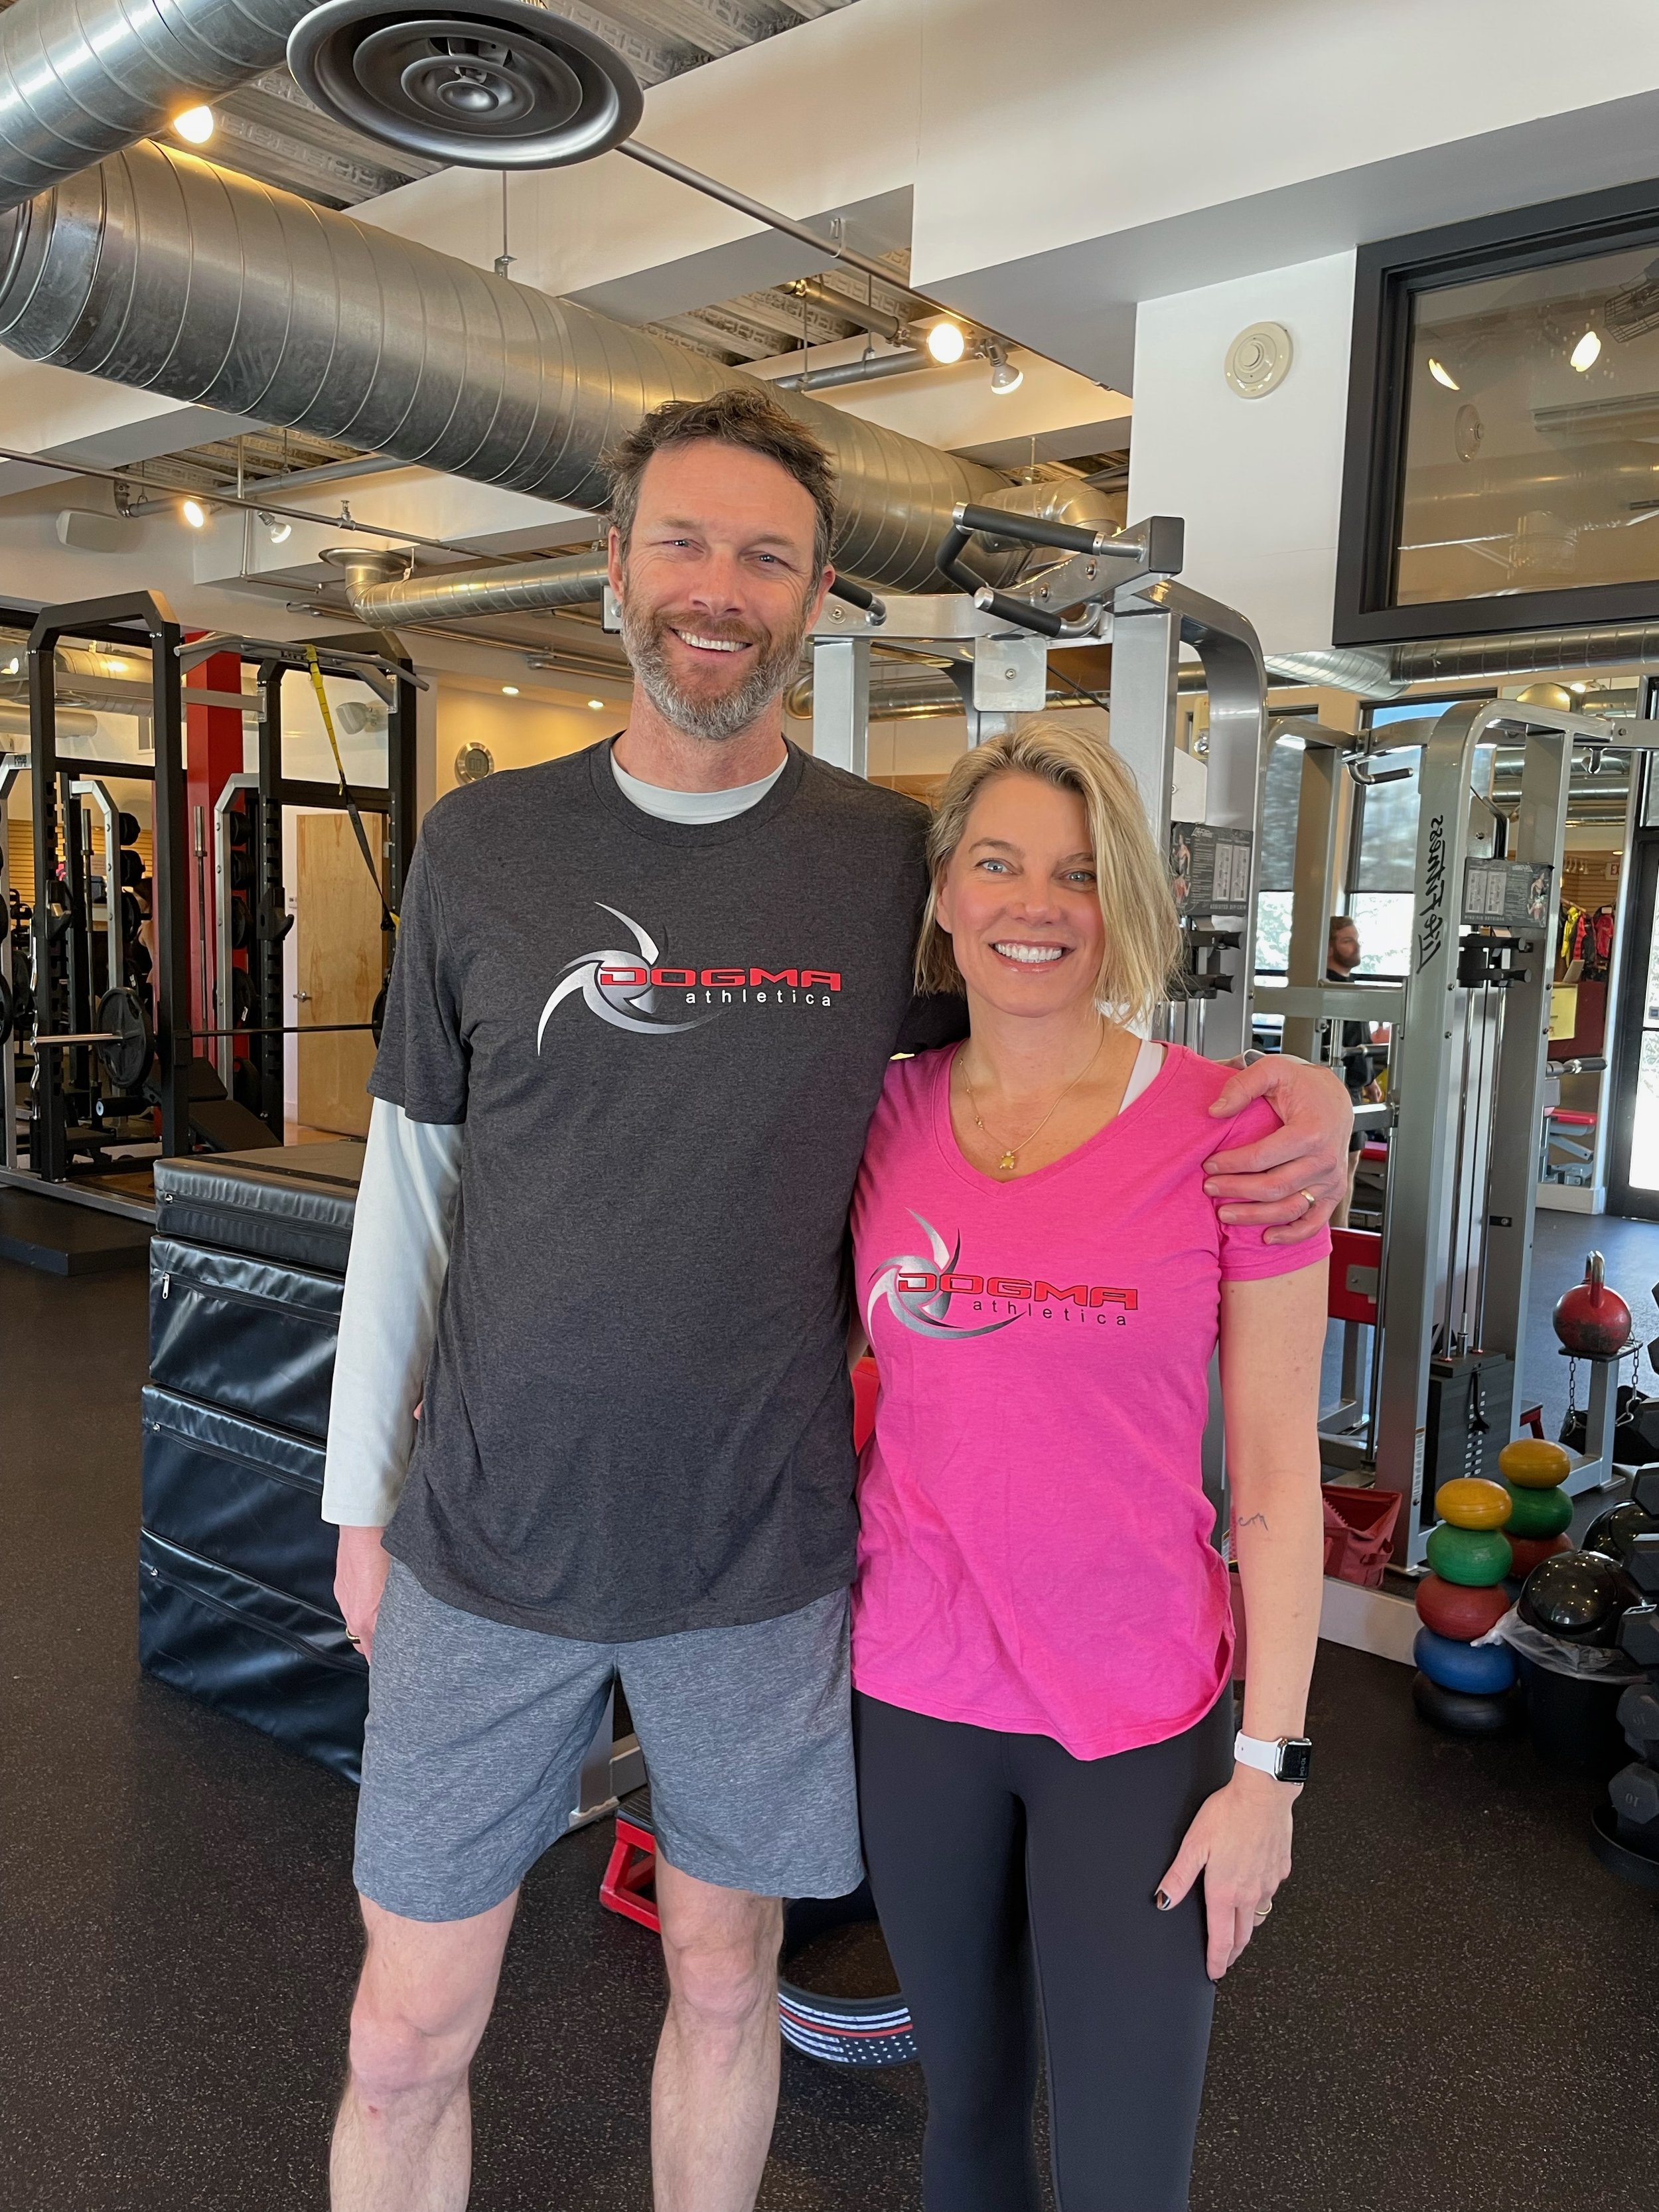 Dogma Athletica February members of the month.  Celebrating fitness training in Avon, Edwards and the Vail Valley Colorado